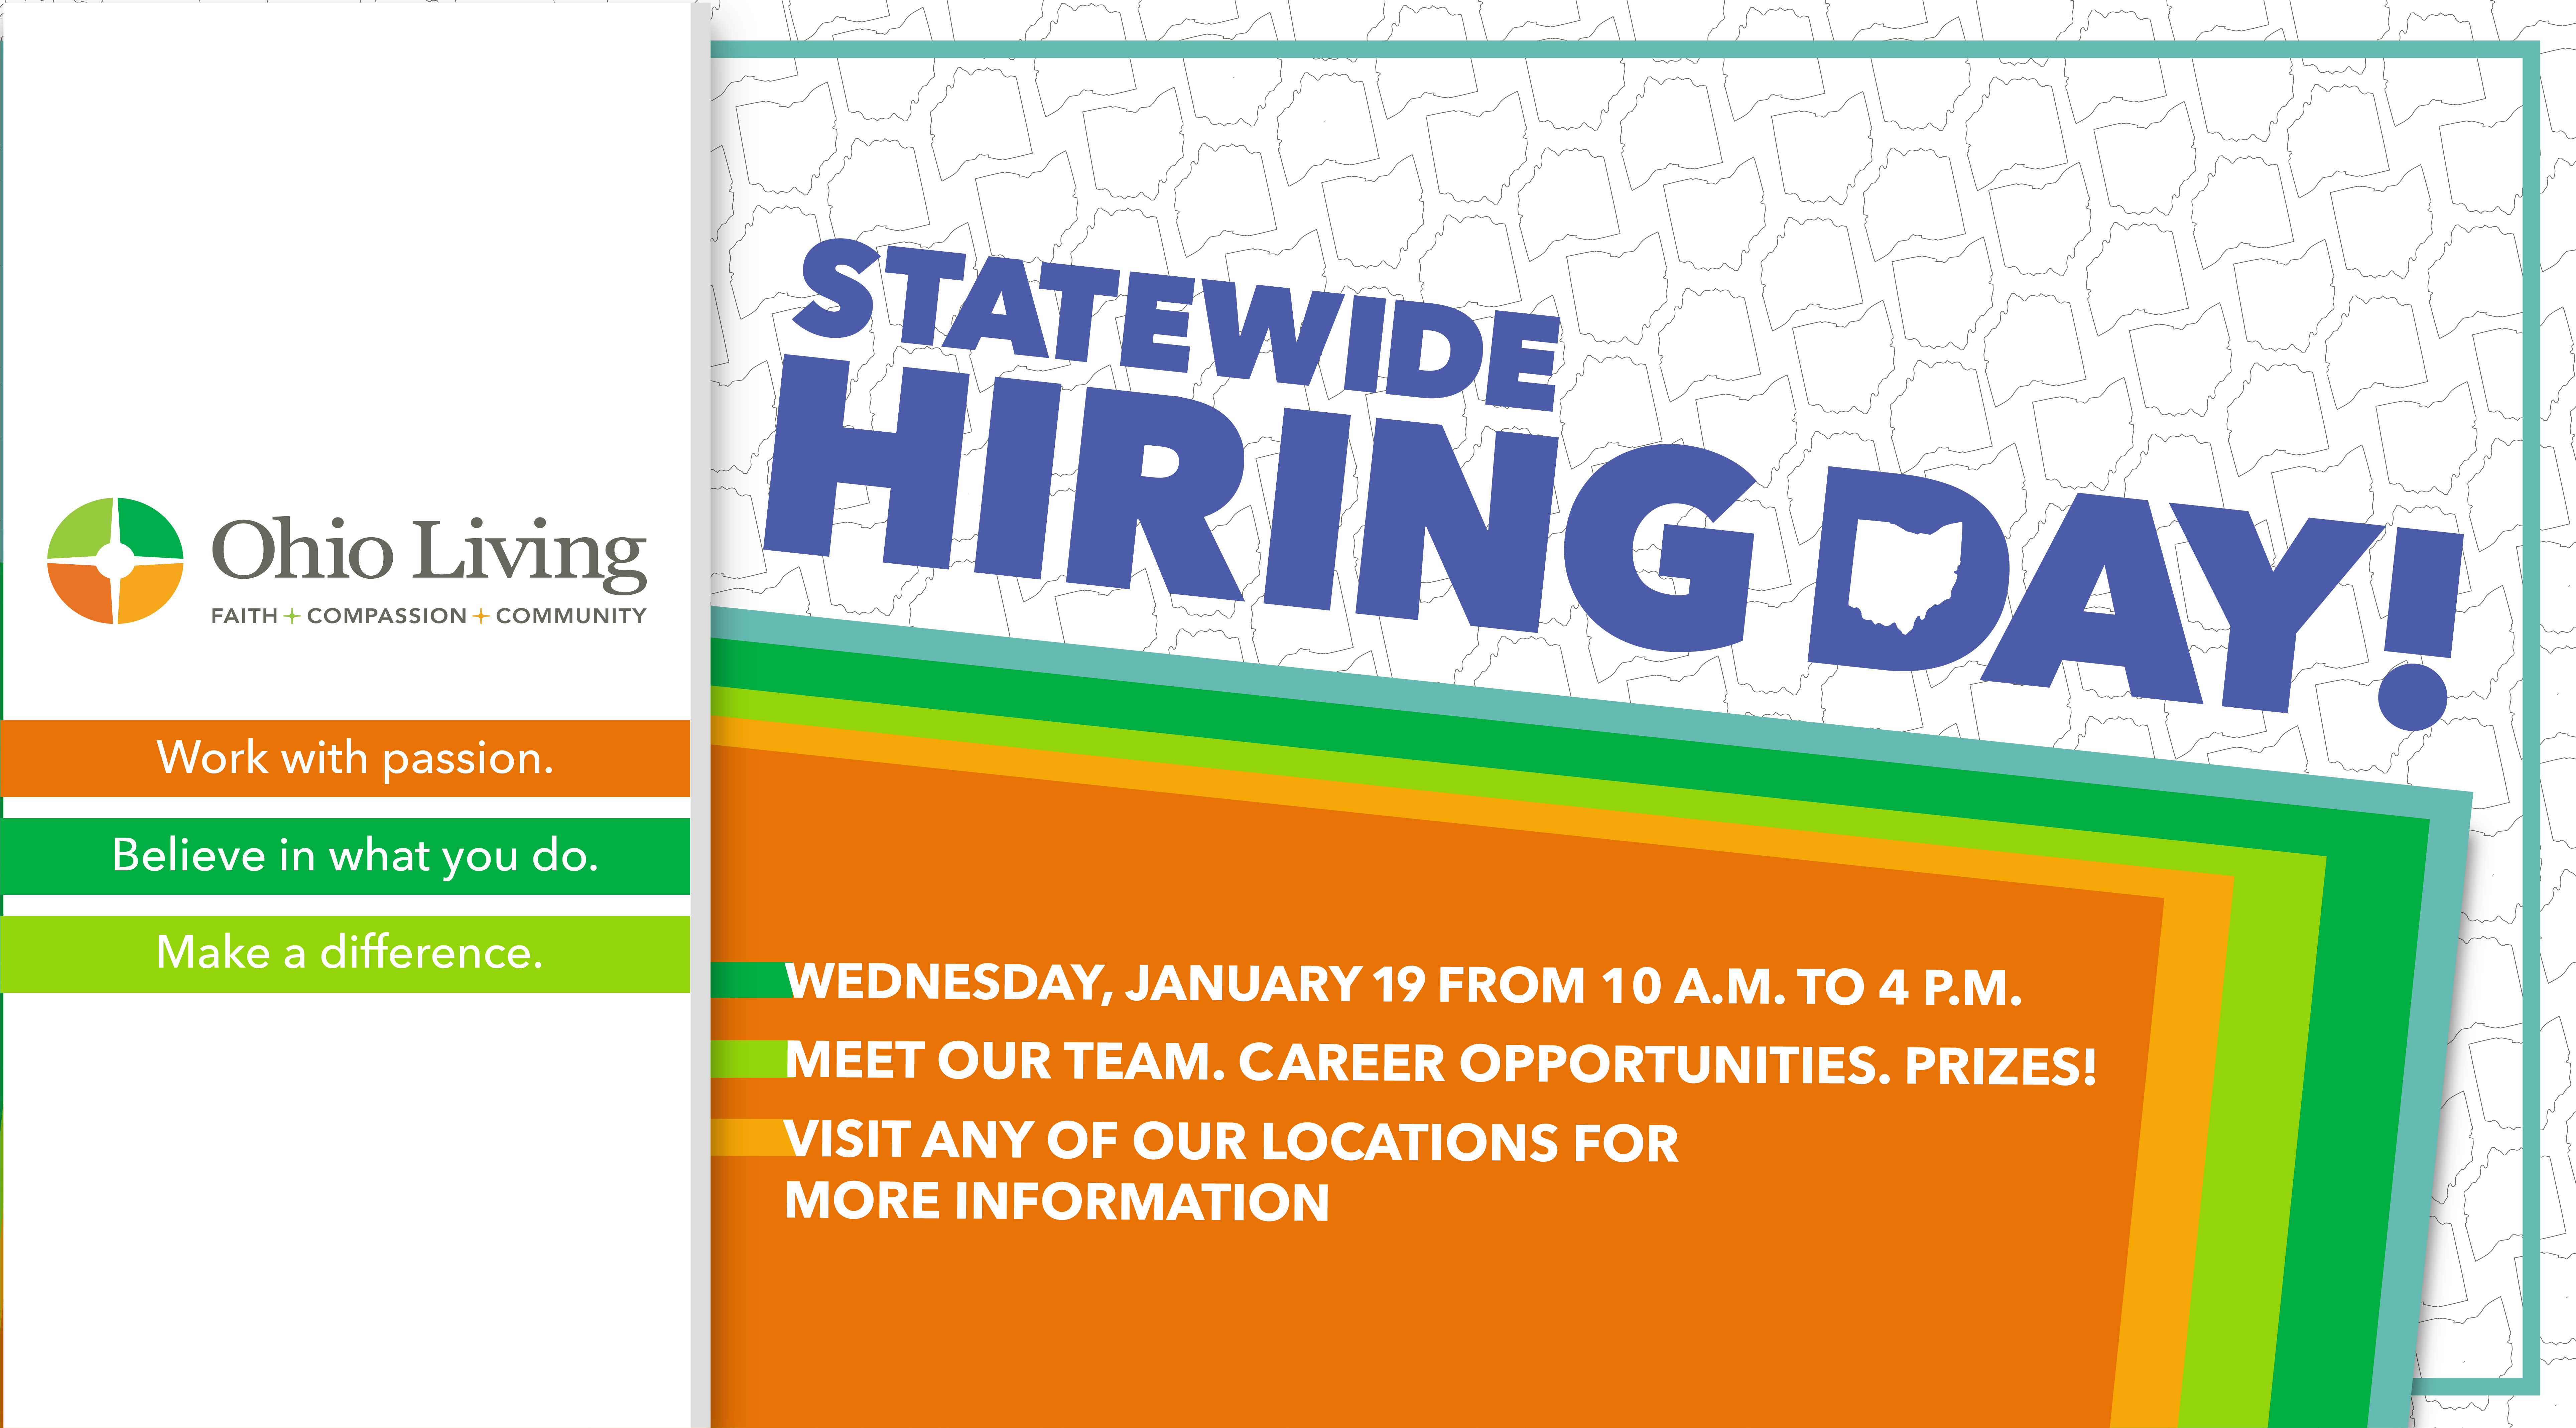 Statewide Hiring Day Facebook Cover Photo_V4